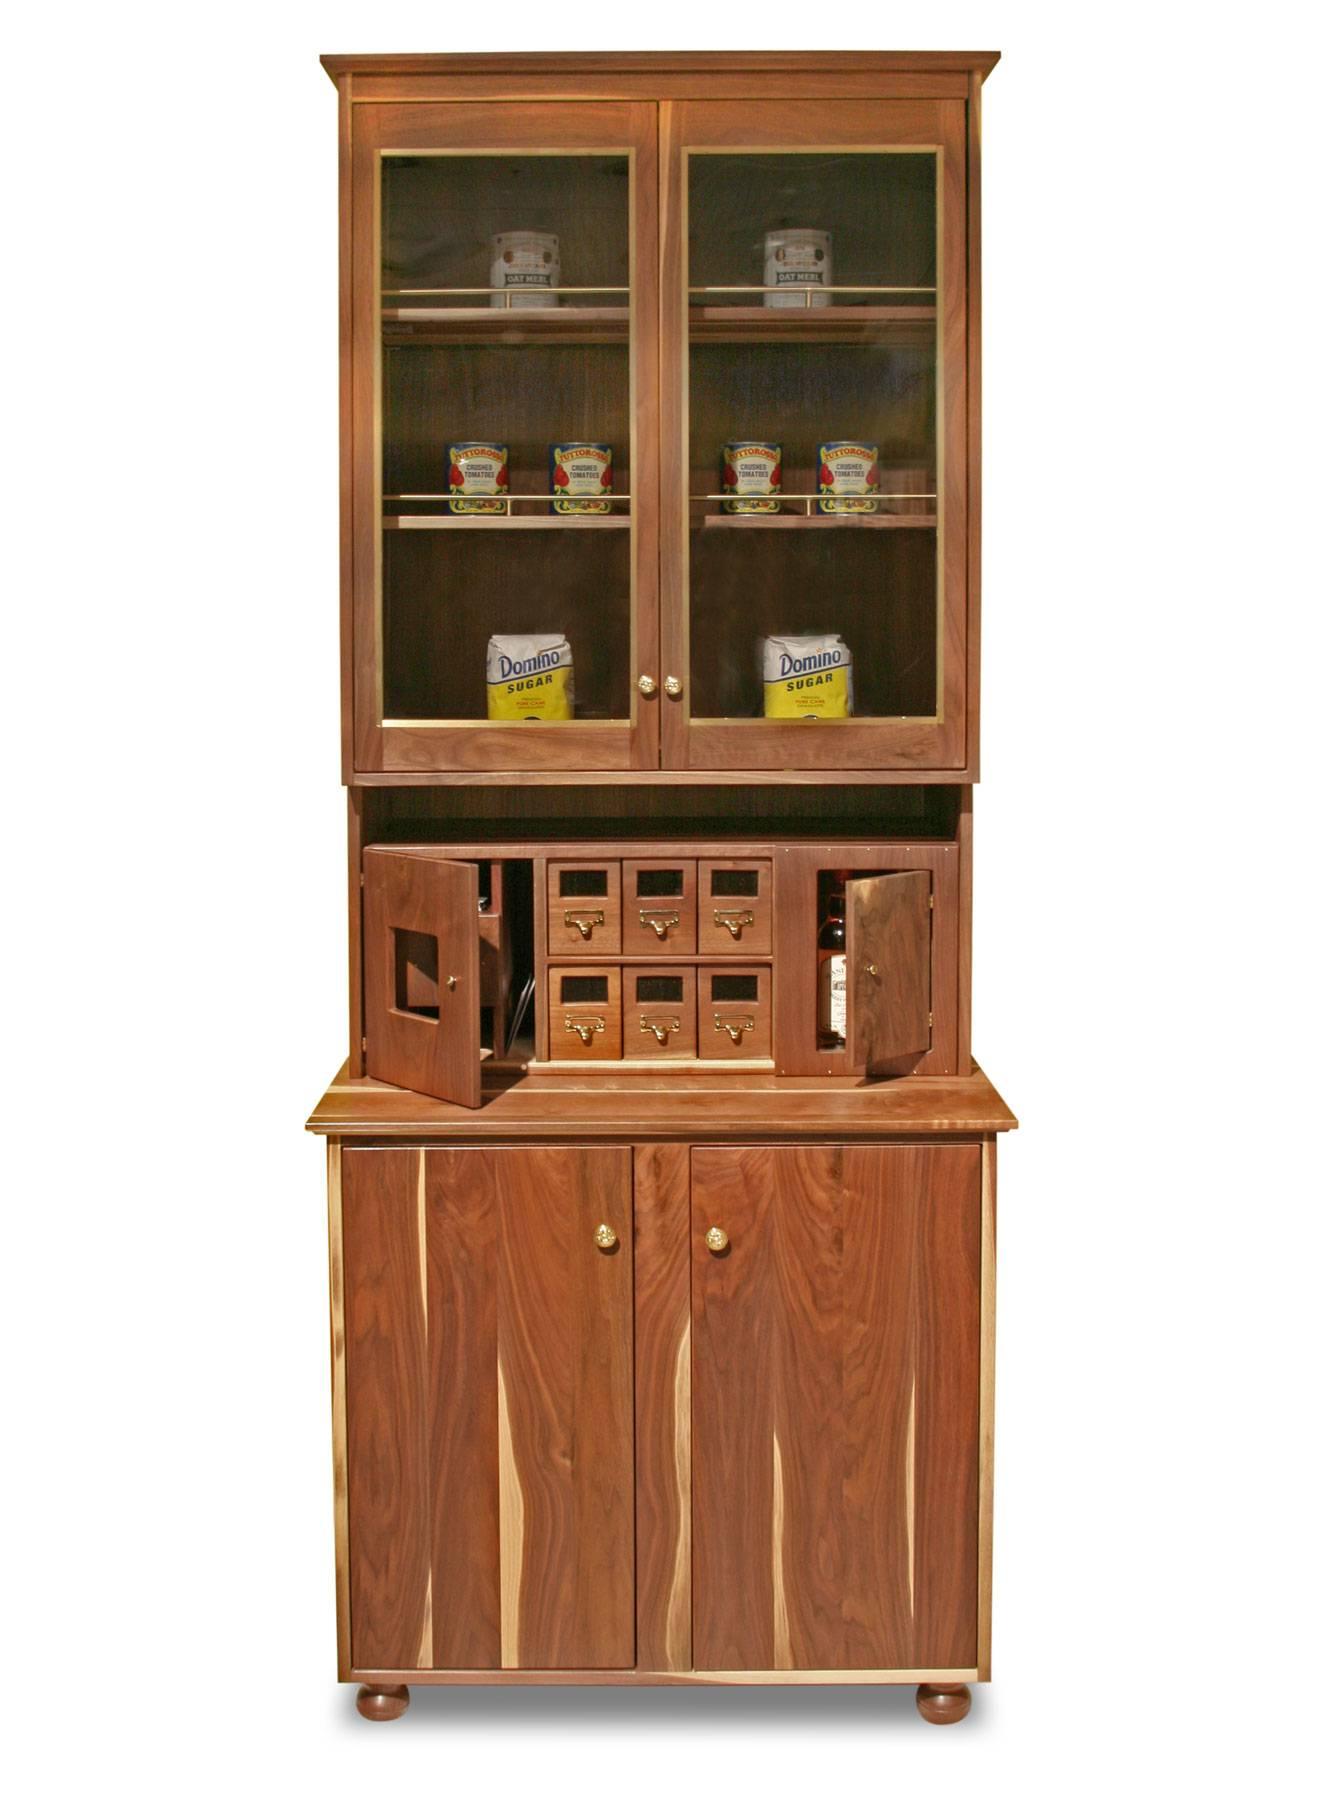 This listing is for a very tall and large walnut cabinet based on a wine cabinet Shimna built for the renowned restaurant Atera in Tribeca. It was made for the International Contemporary Furniture Fair in 2012. 

The upper cabinet has two large